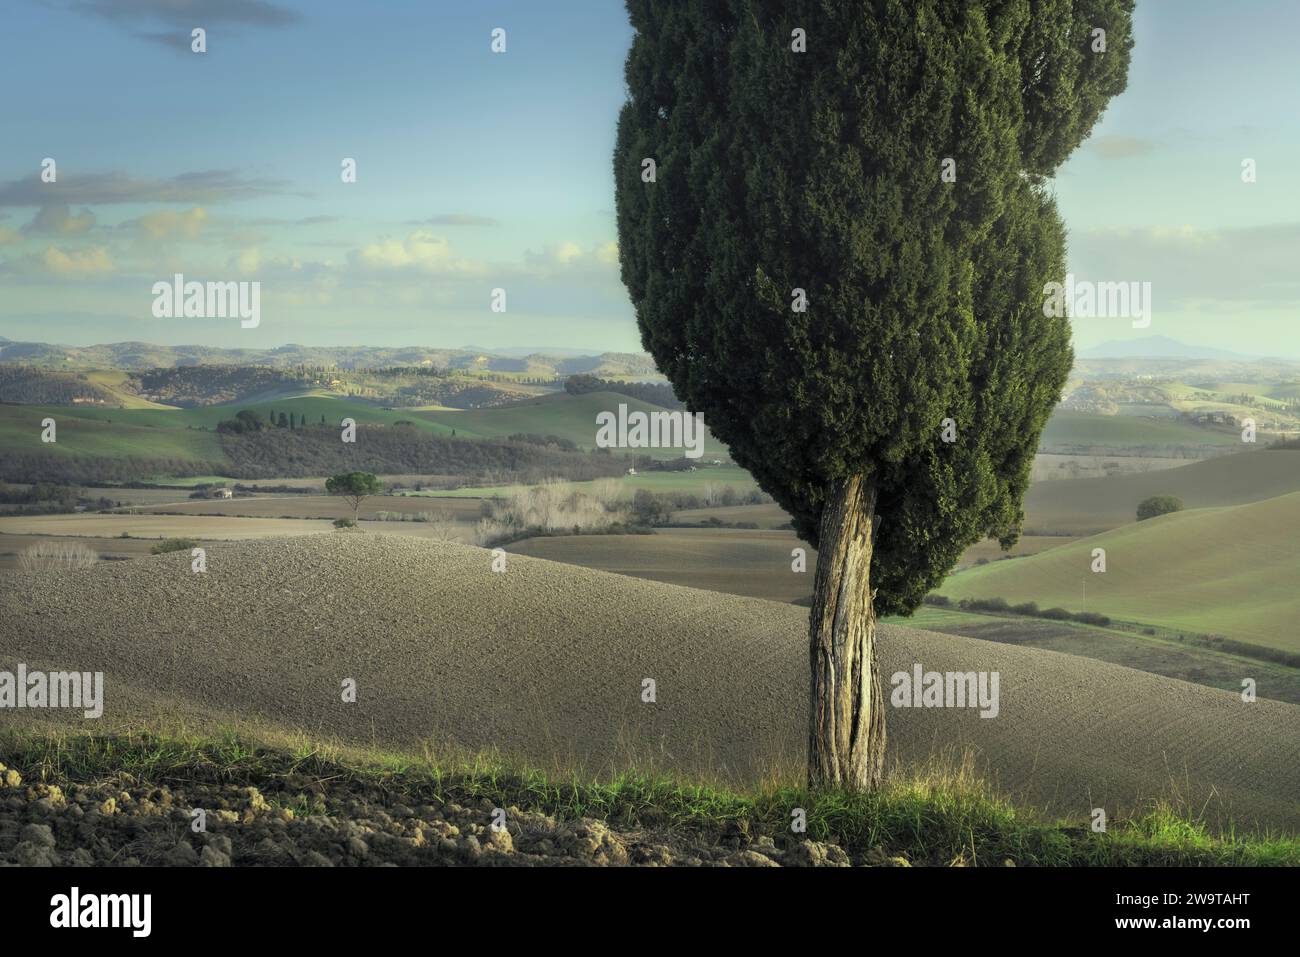 Cypress and pine on the hills of the Crete Senesi. Landscape in Lucignano d'Arbia, Tuscany region. Italy Stock Photo